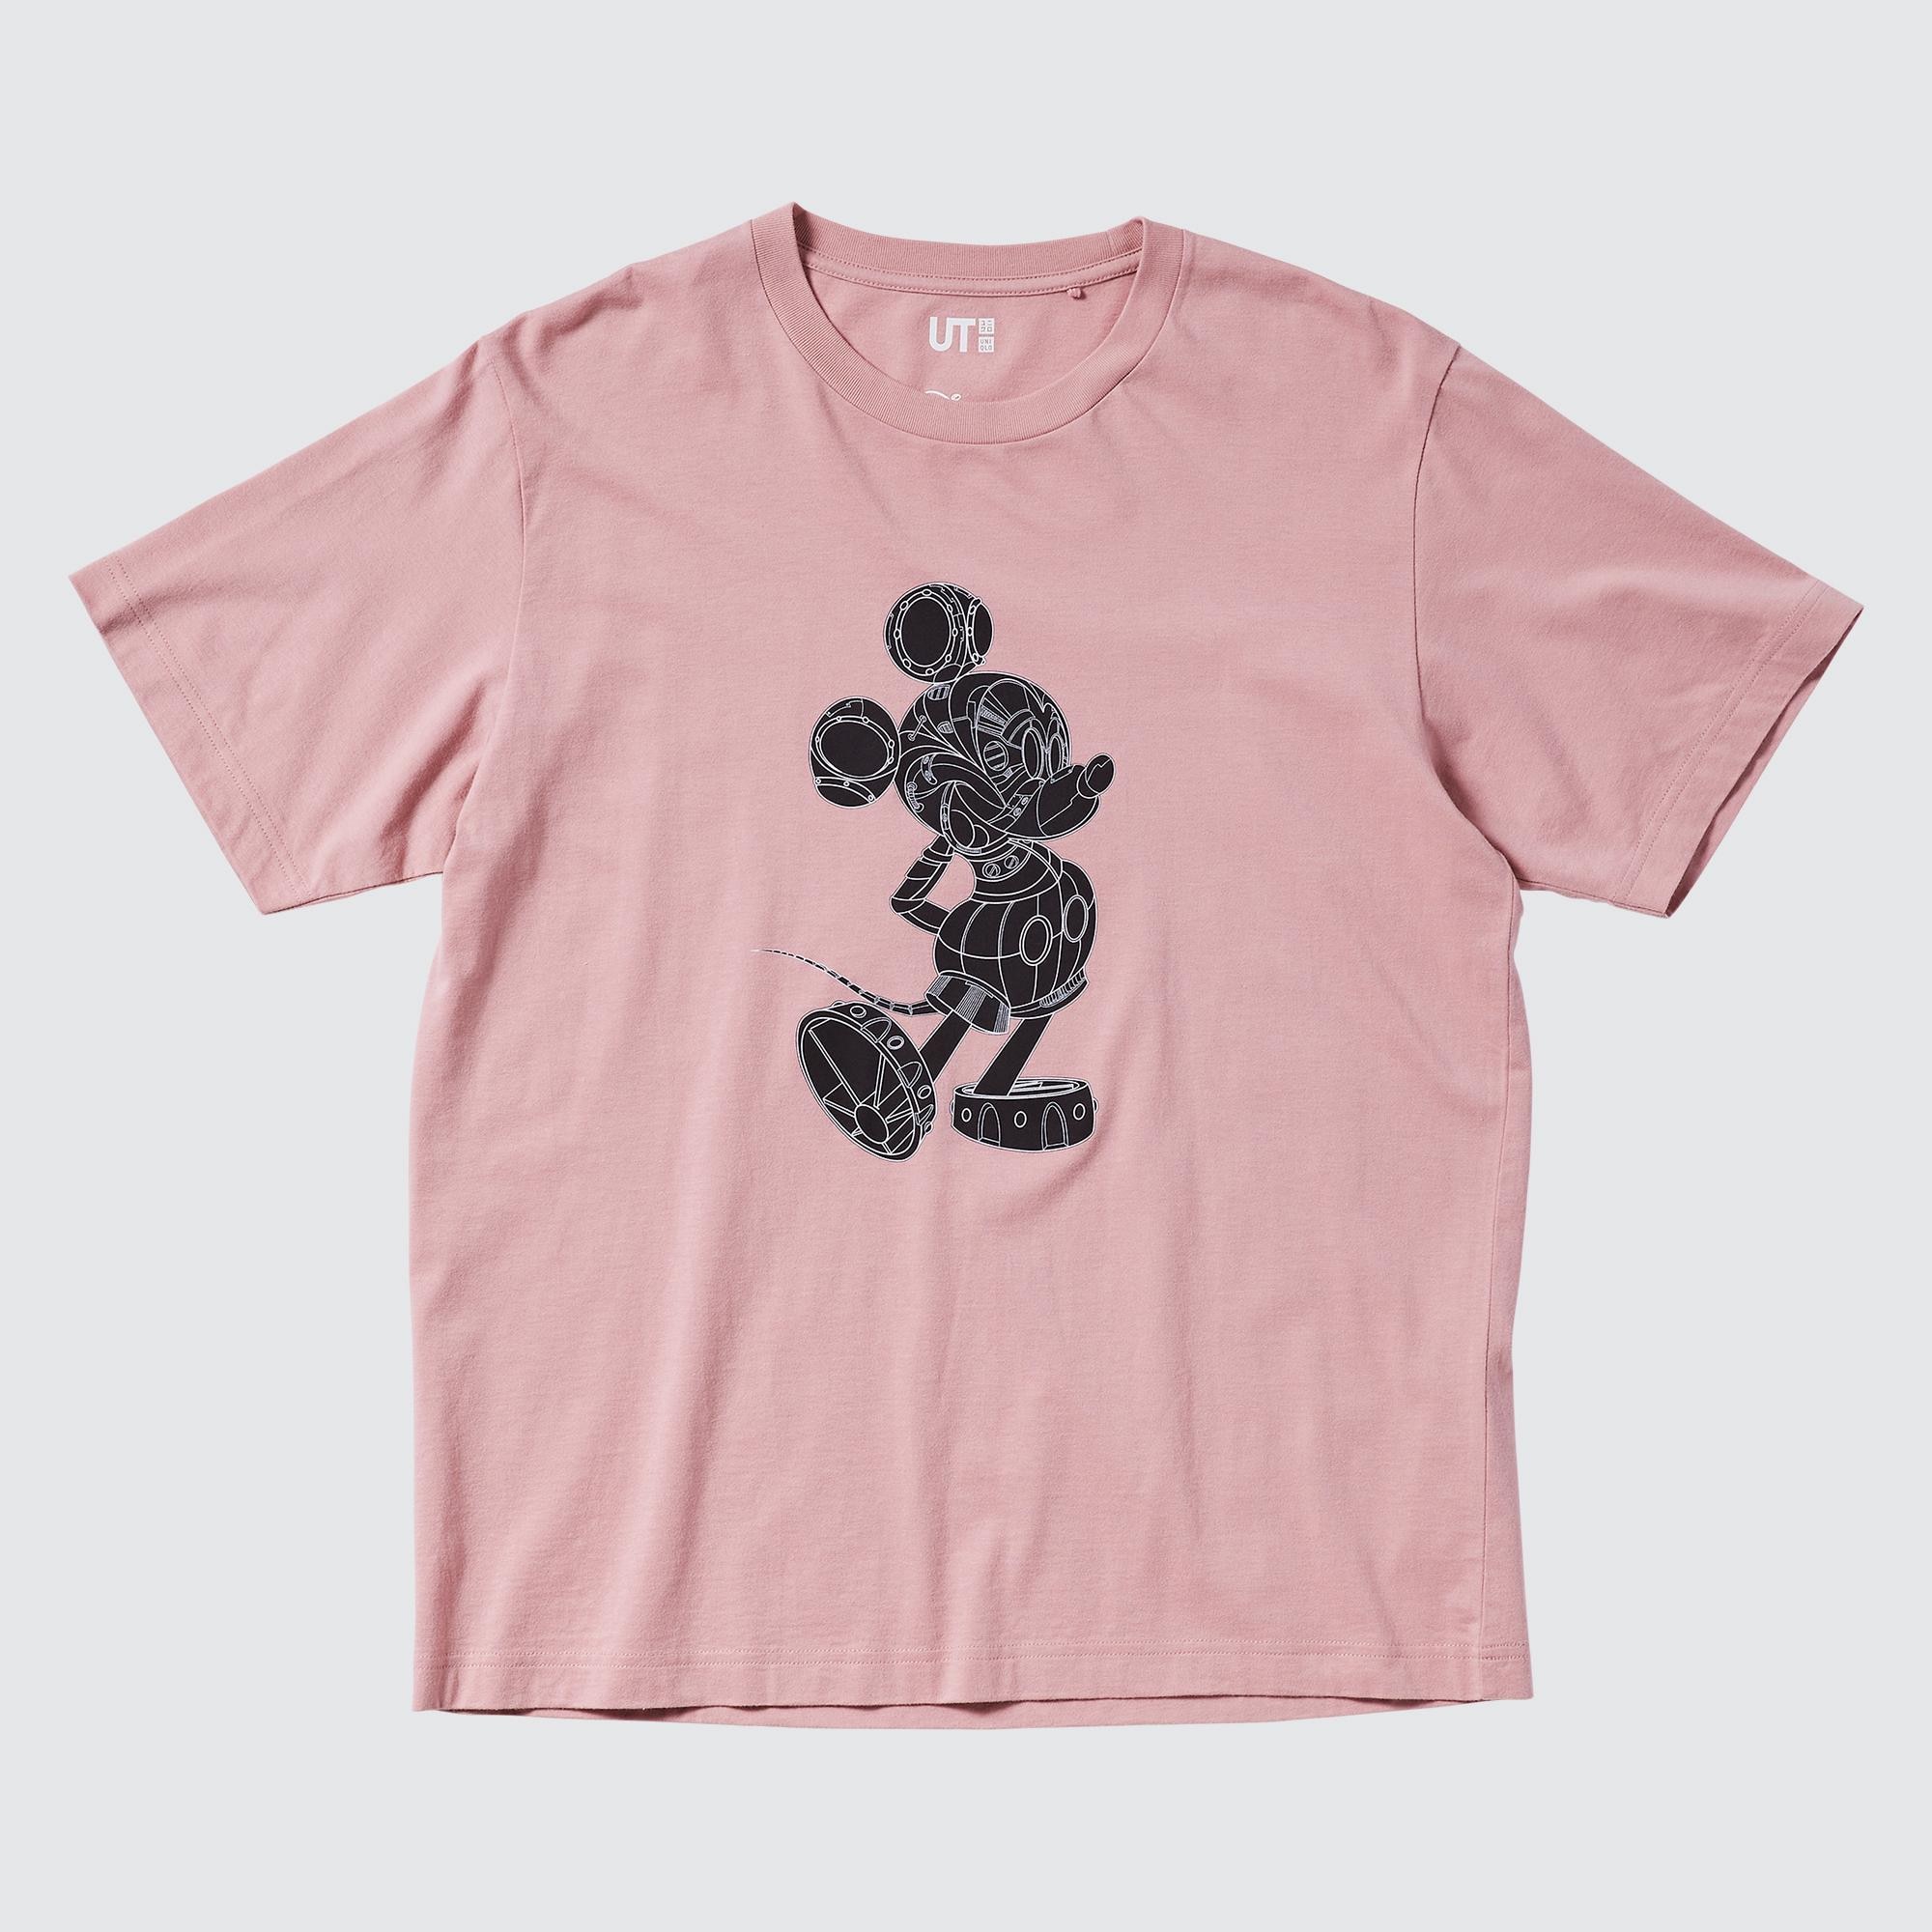 These minimalist Disney Princess tees offer the perfect lowkey Disney style